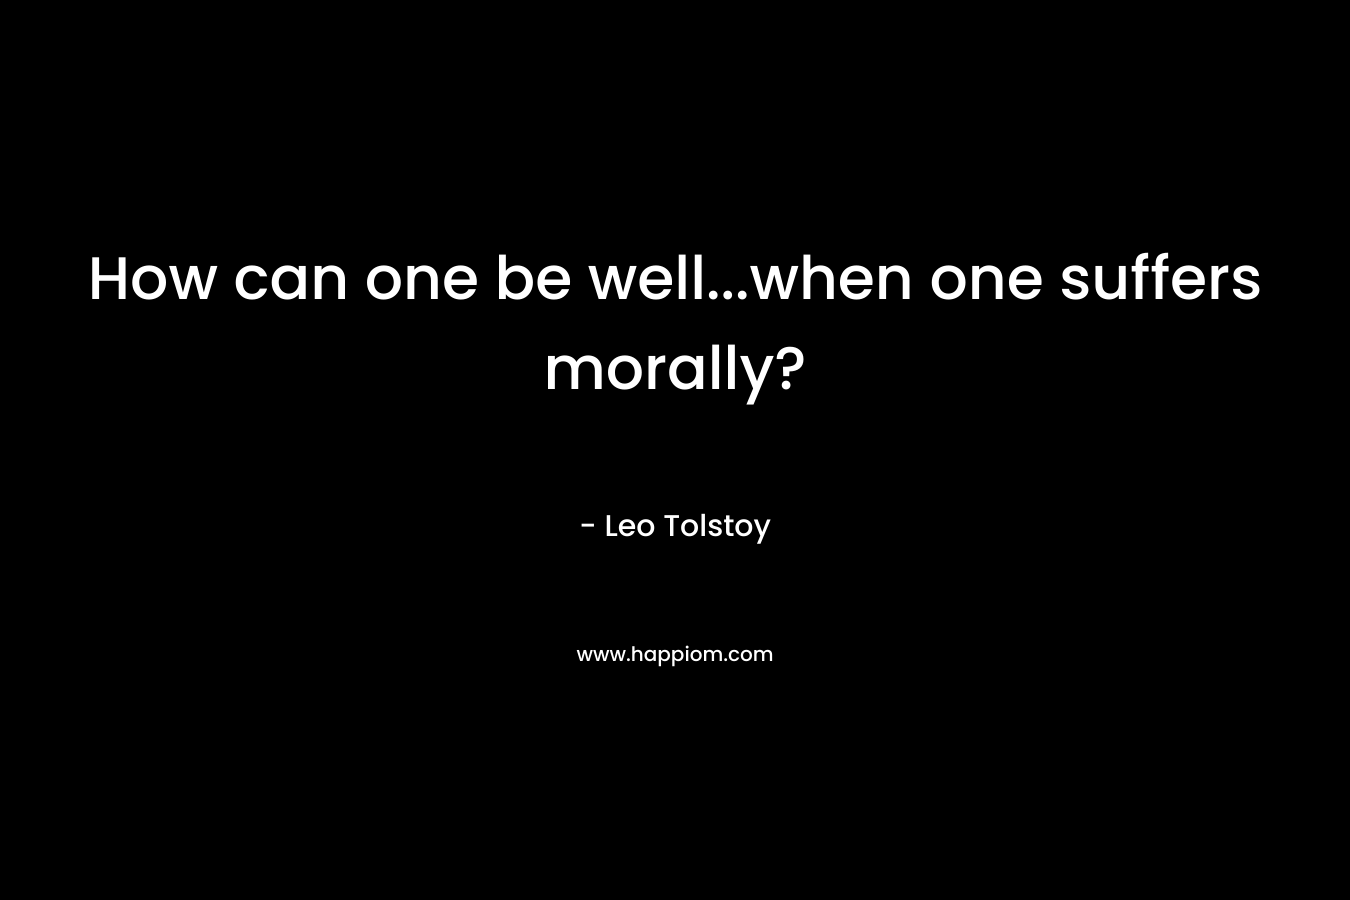 How can one be well...when one suffers morally?